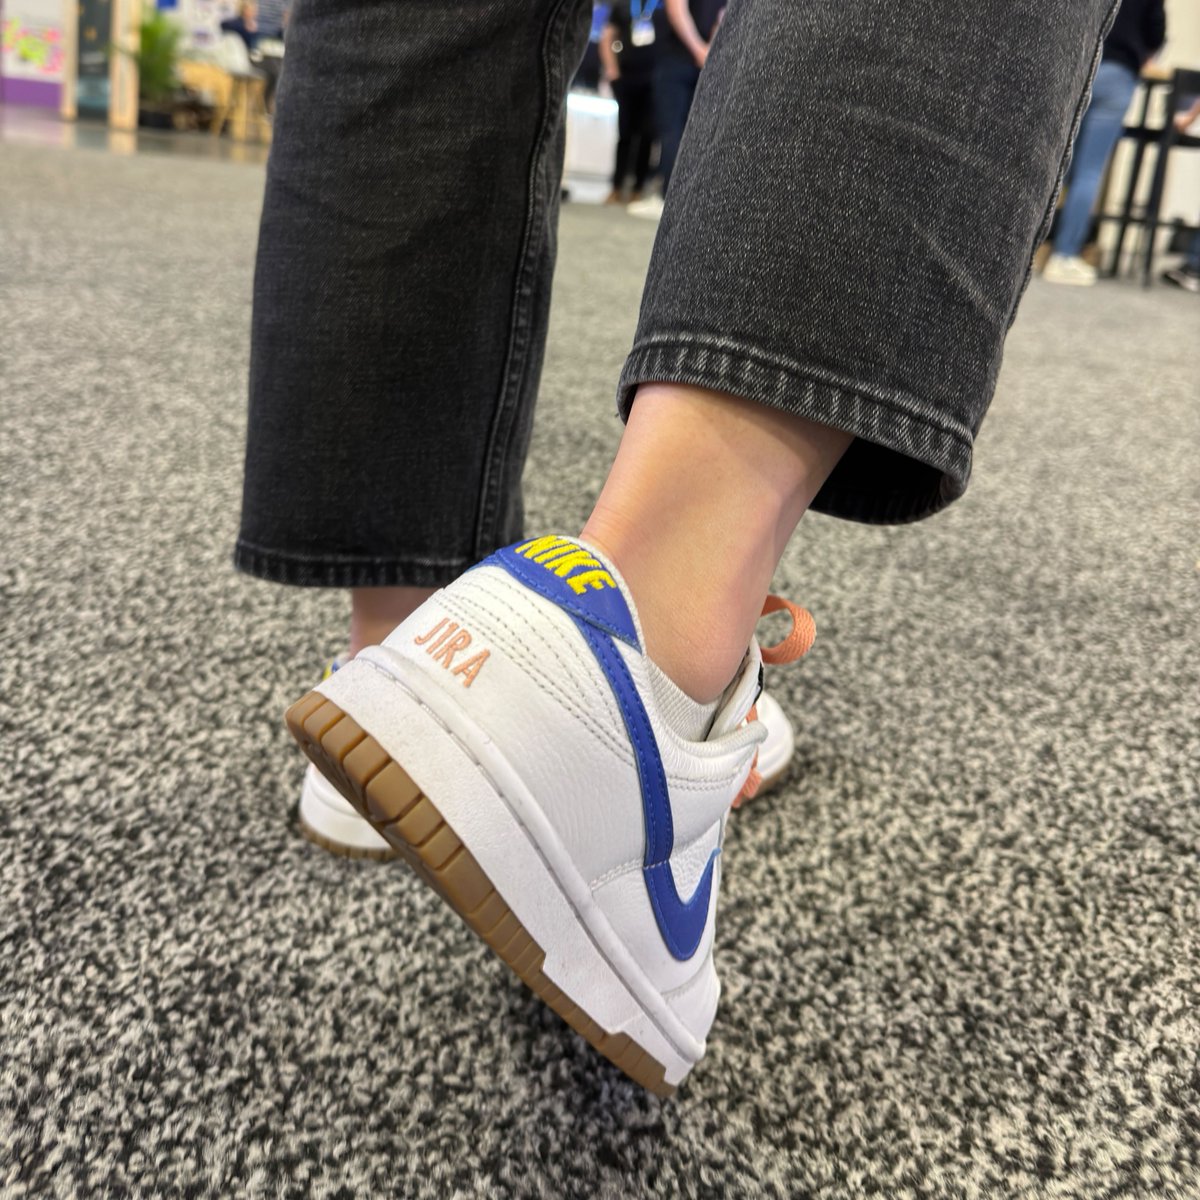 Who loves prizes? Win a pair of @Jira-branded @Nike Dunks.👟 Share a selfie at the @Atlassian Intelligence booth on LinkedIn or X with the #JiraSneakers. Tag the @Jira account and give us your best cheese by 5/2 @ 2 PM PDT!